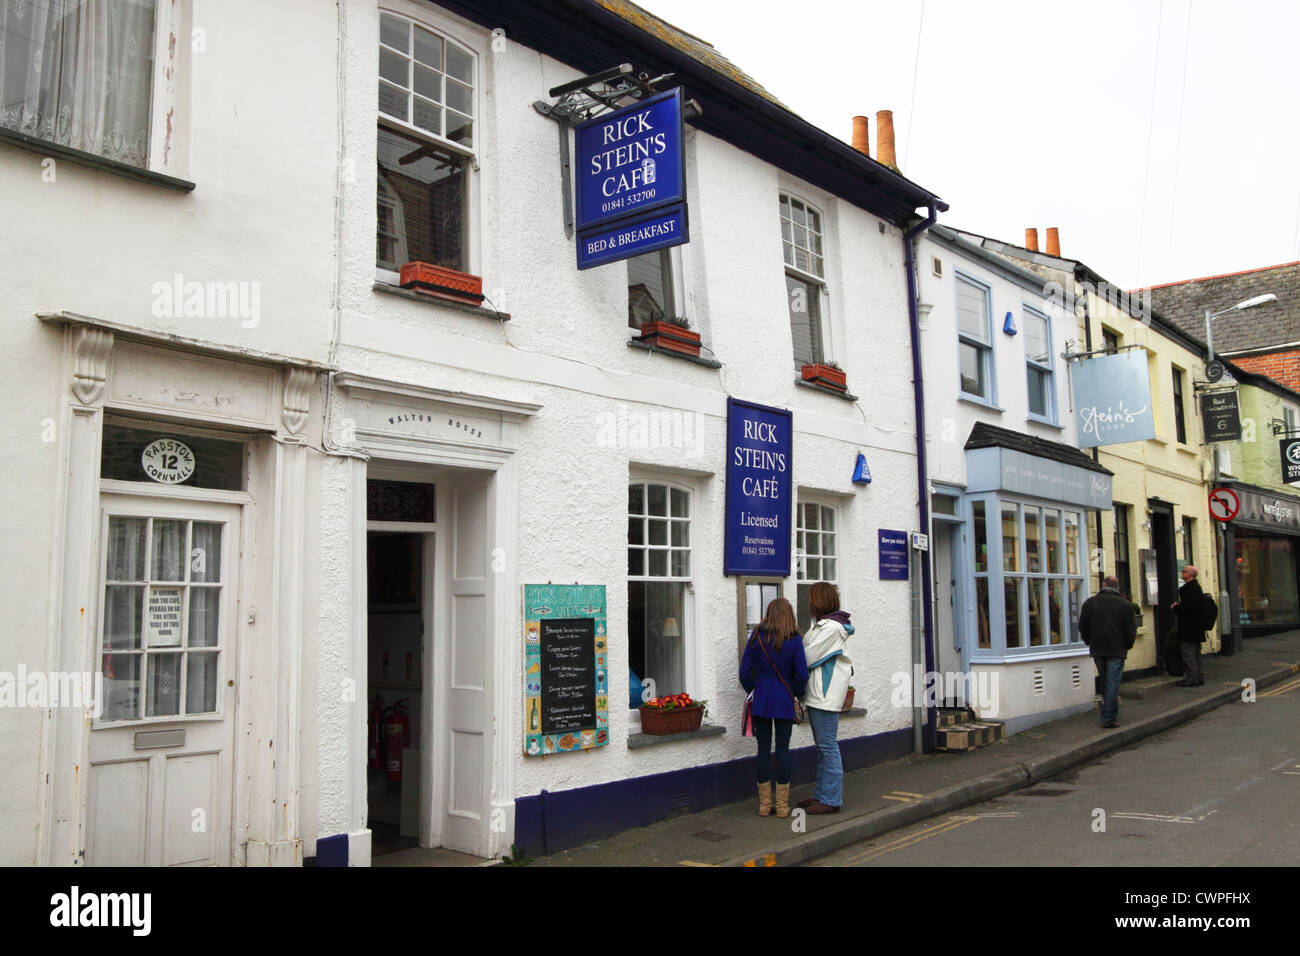 Rick Stein shop and cafe, Padstow, Cornwall. Stock Photo